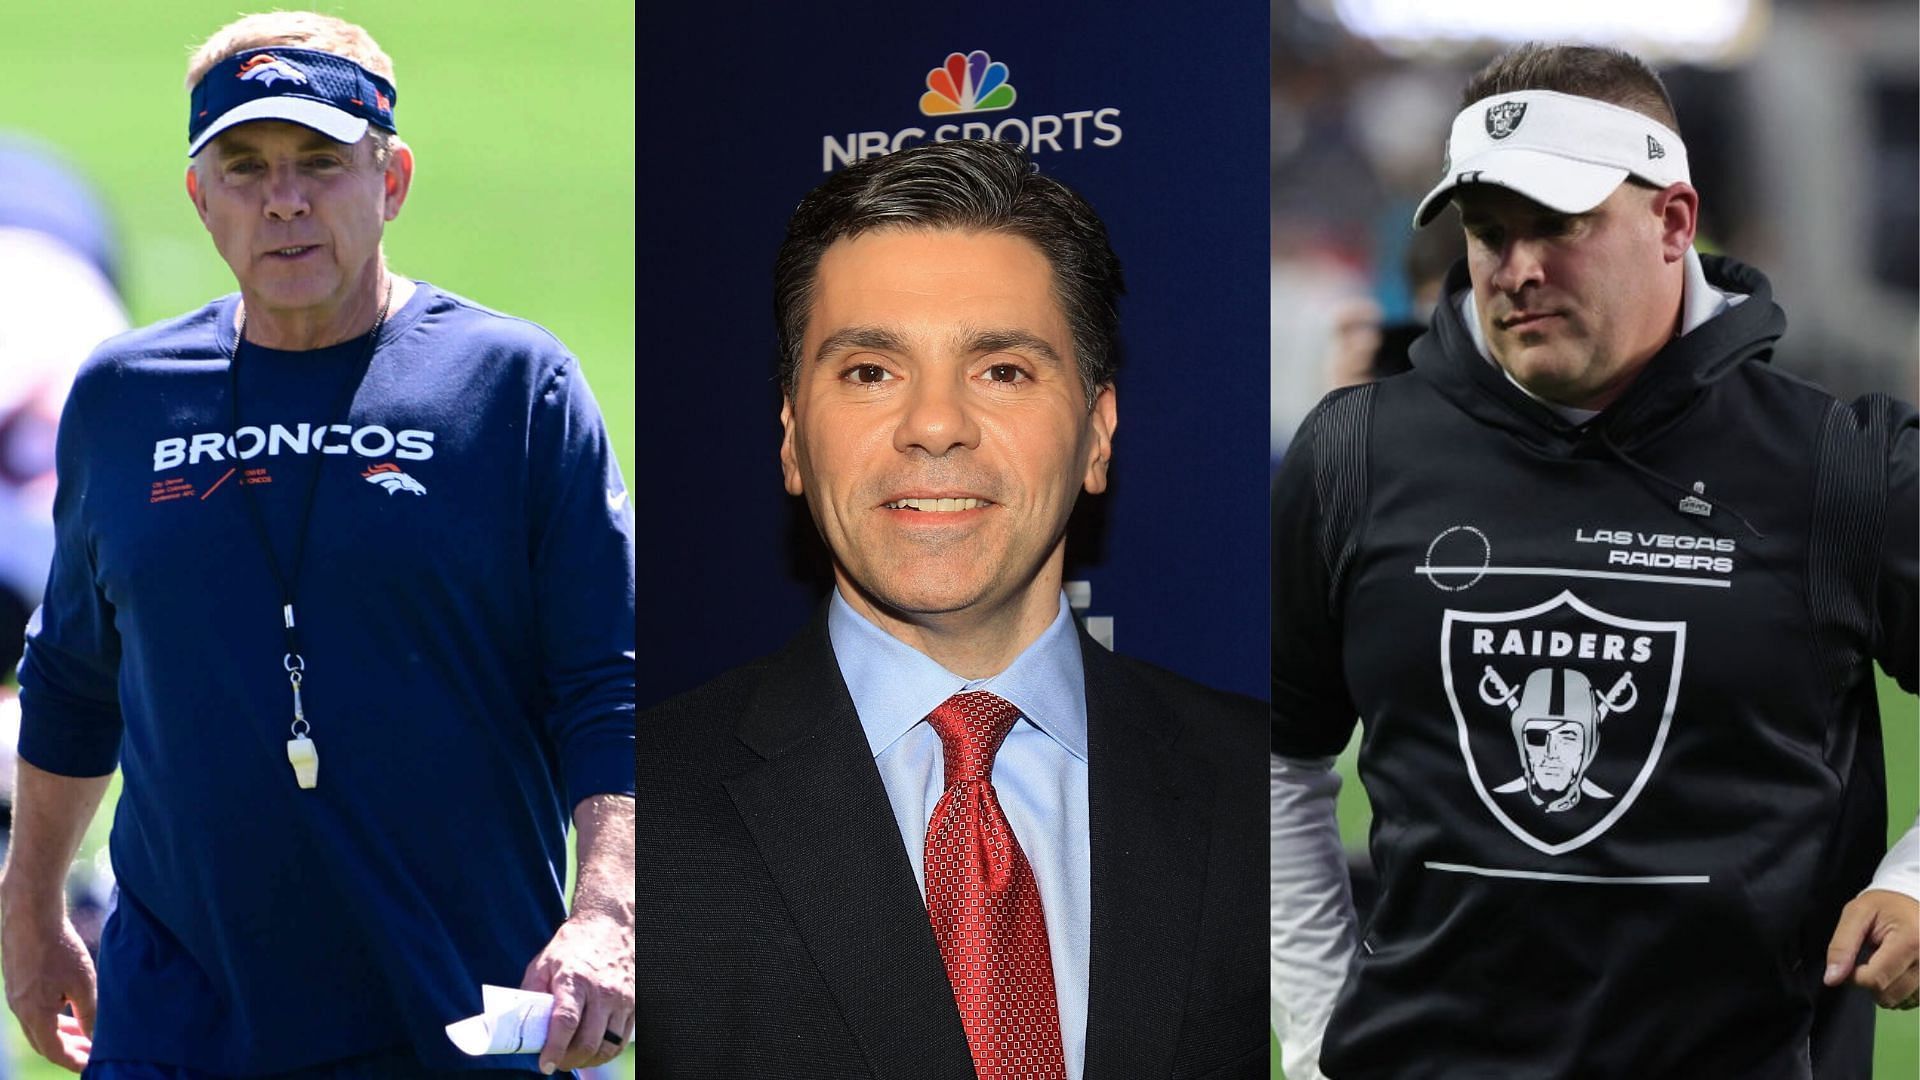 Mike Florio believes Broncos owner was thinking about giving Sean Payton the Josh McDaniels treatment before two impossible wins